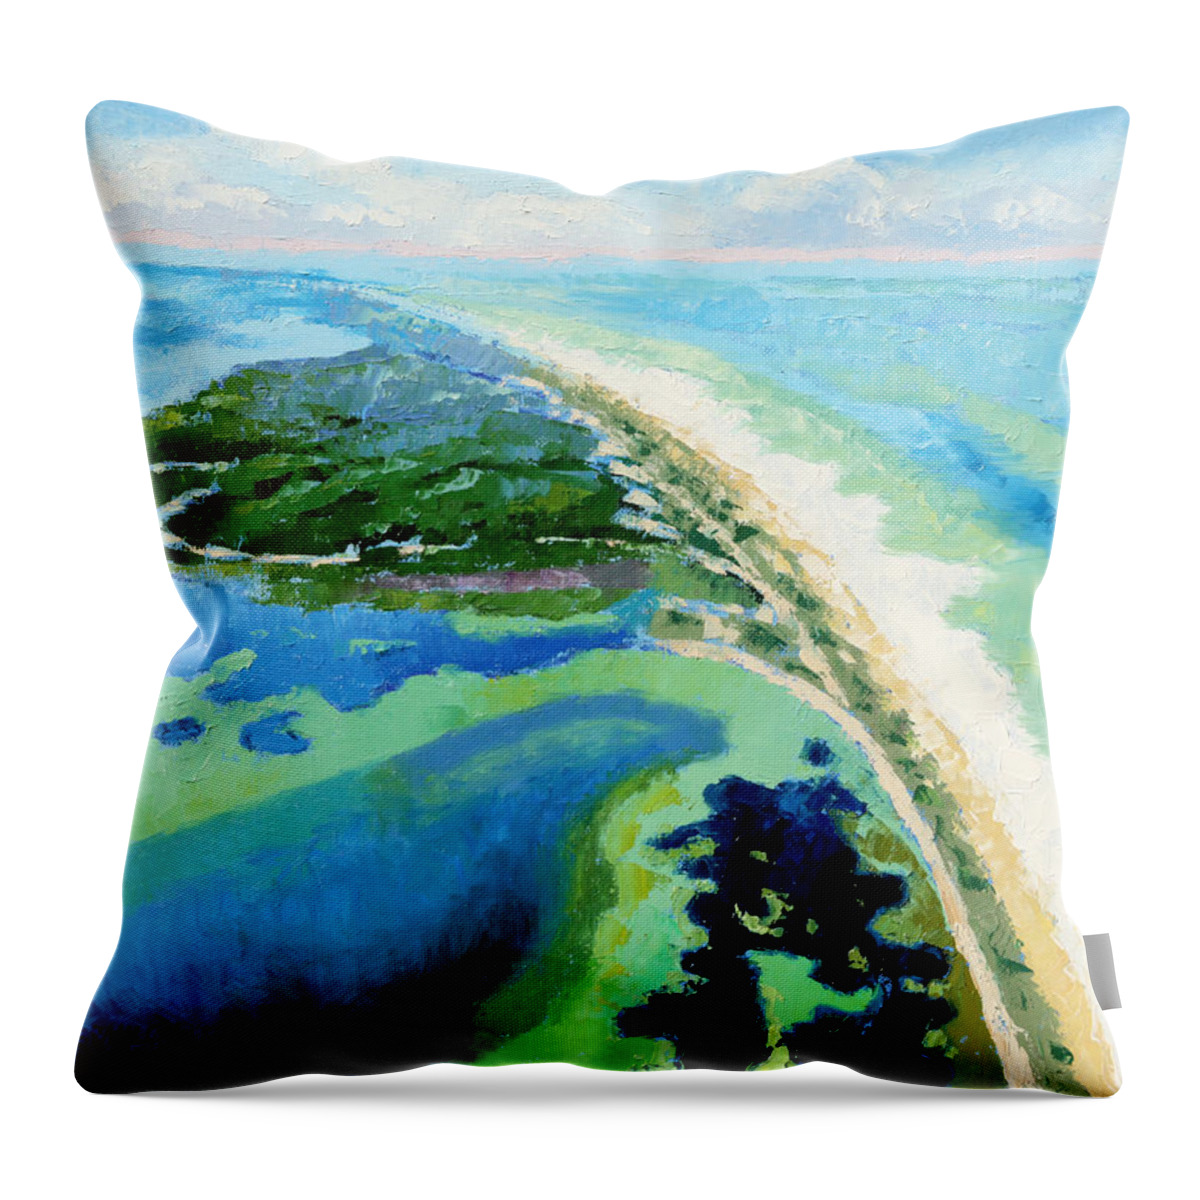 Landscape Throw Pillow featuring the painting Cape San Blas Florida by John Lautermilch